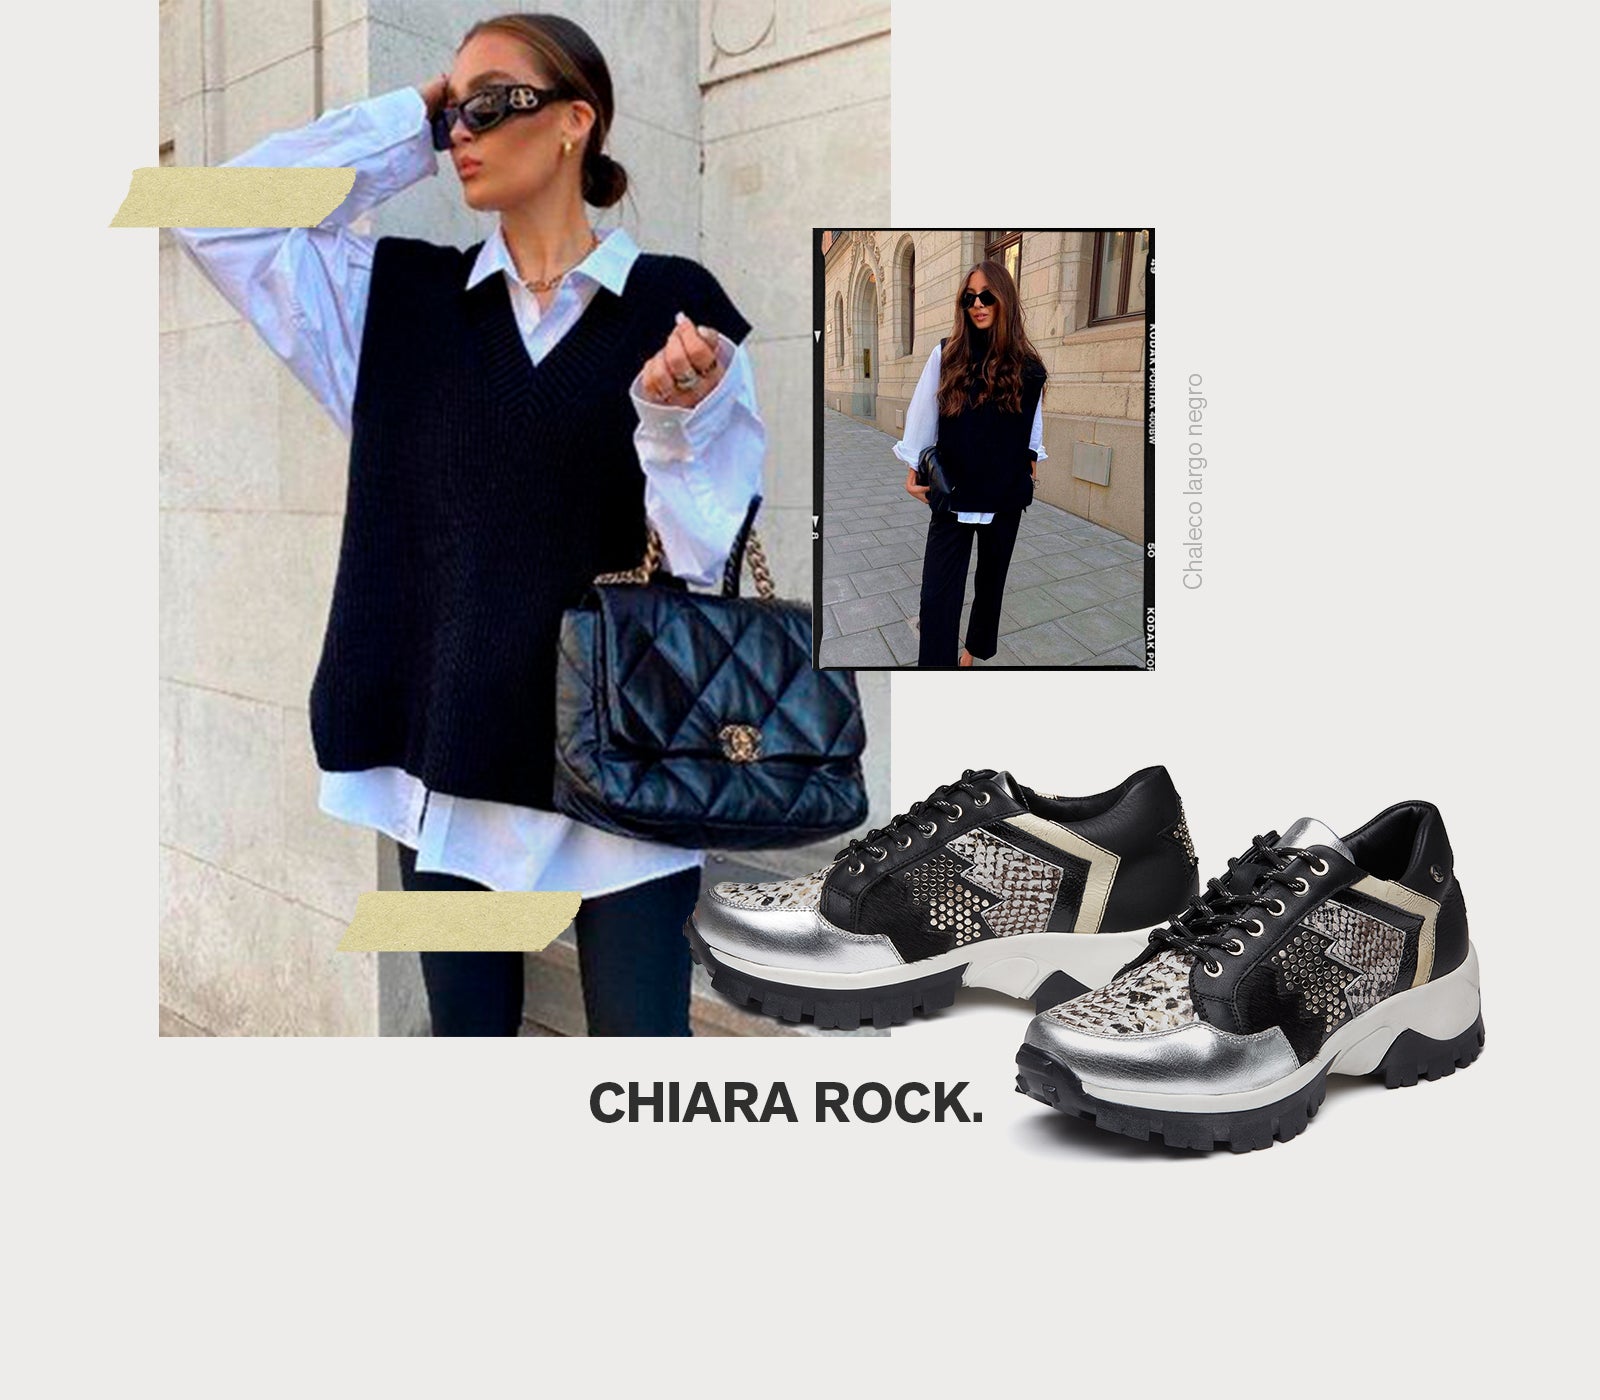 outfit chaleco azul rey mujer